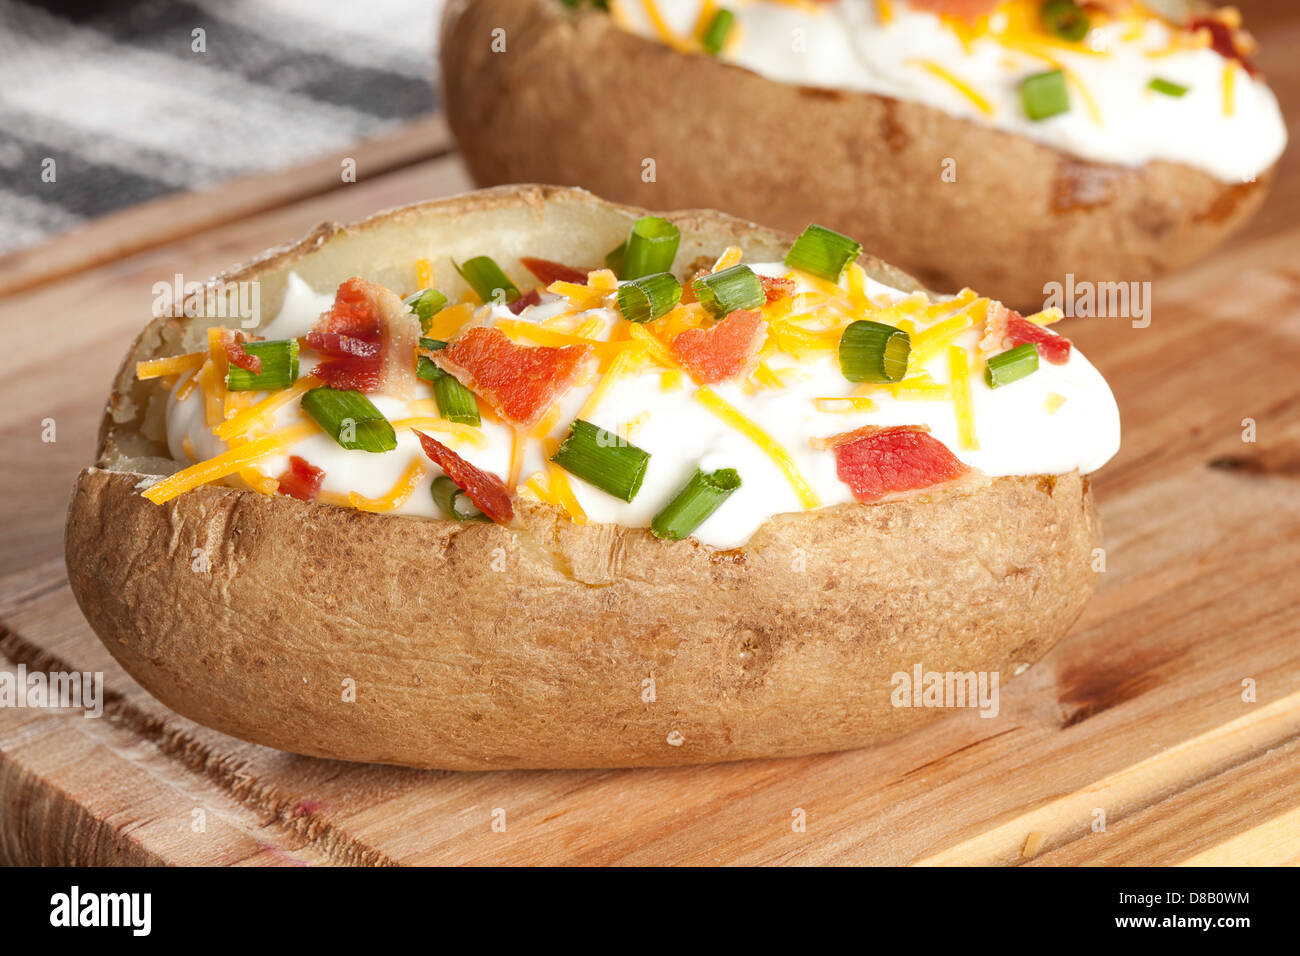 Hot Baked Potato with chives, cheese, and sour cream Stock Photo